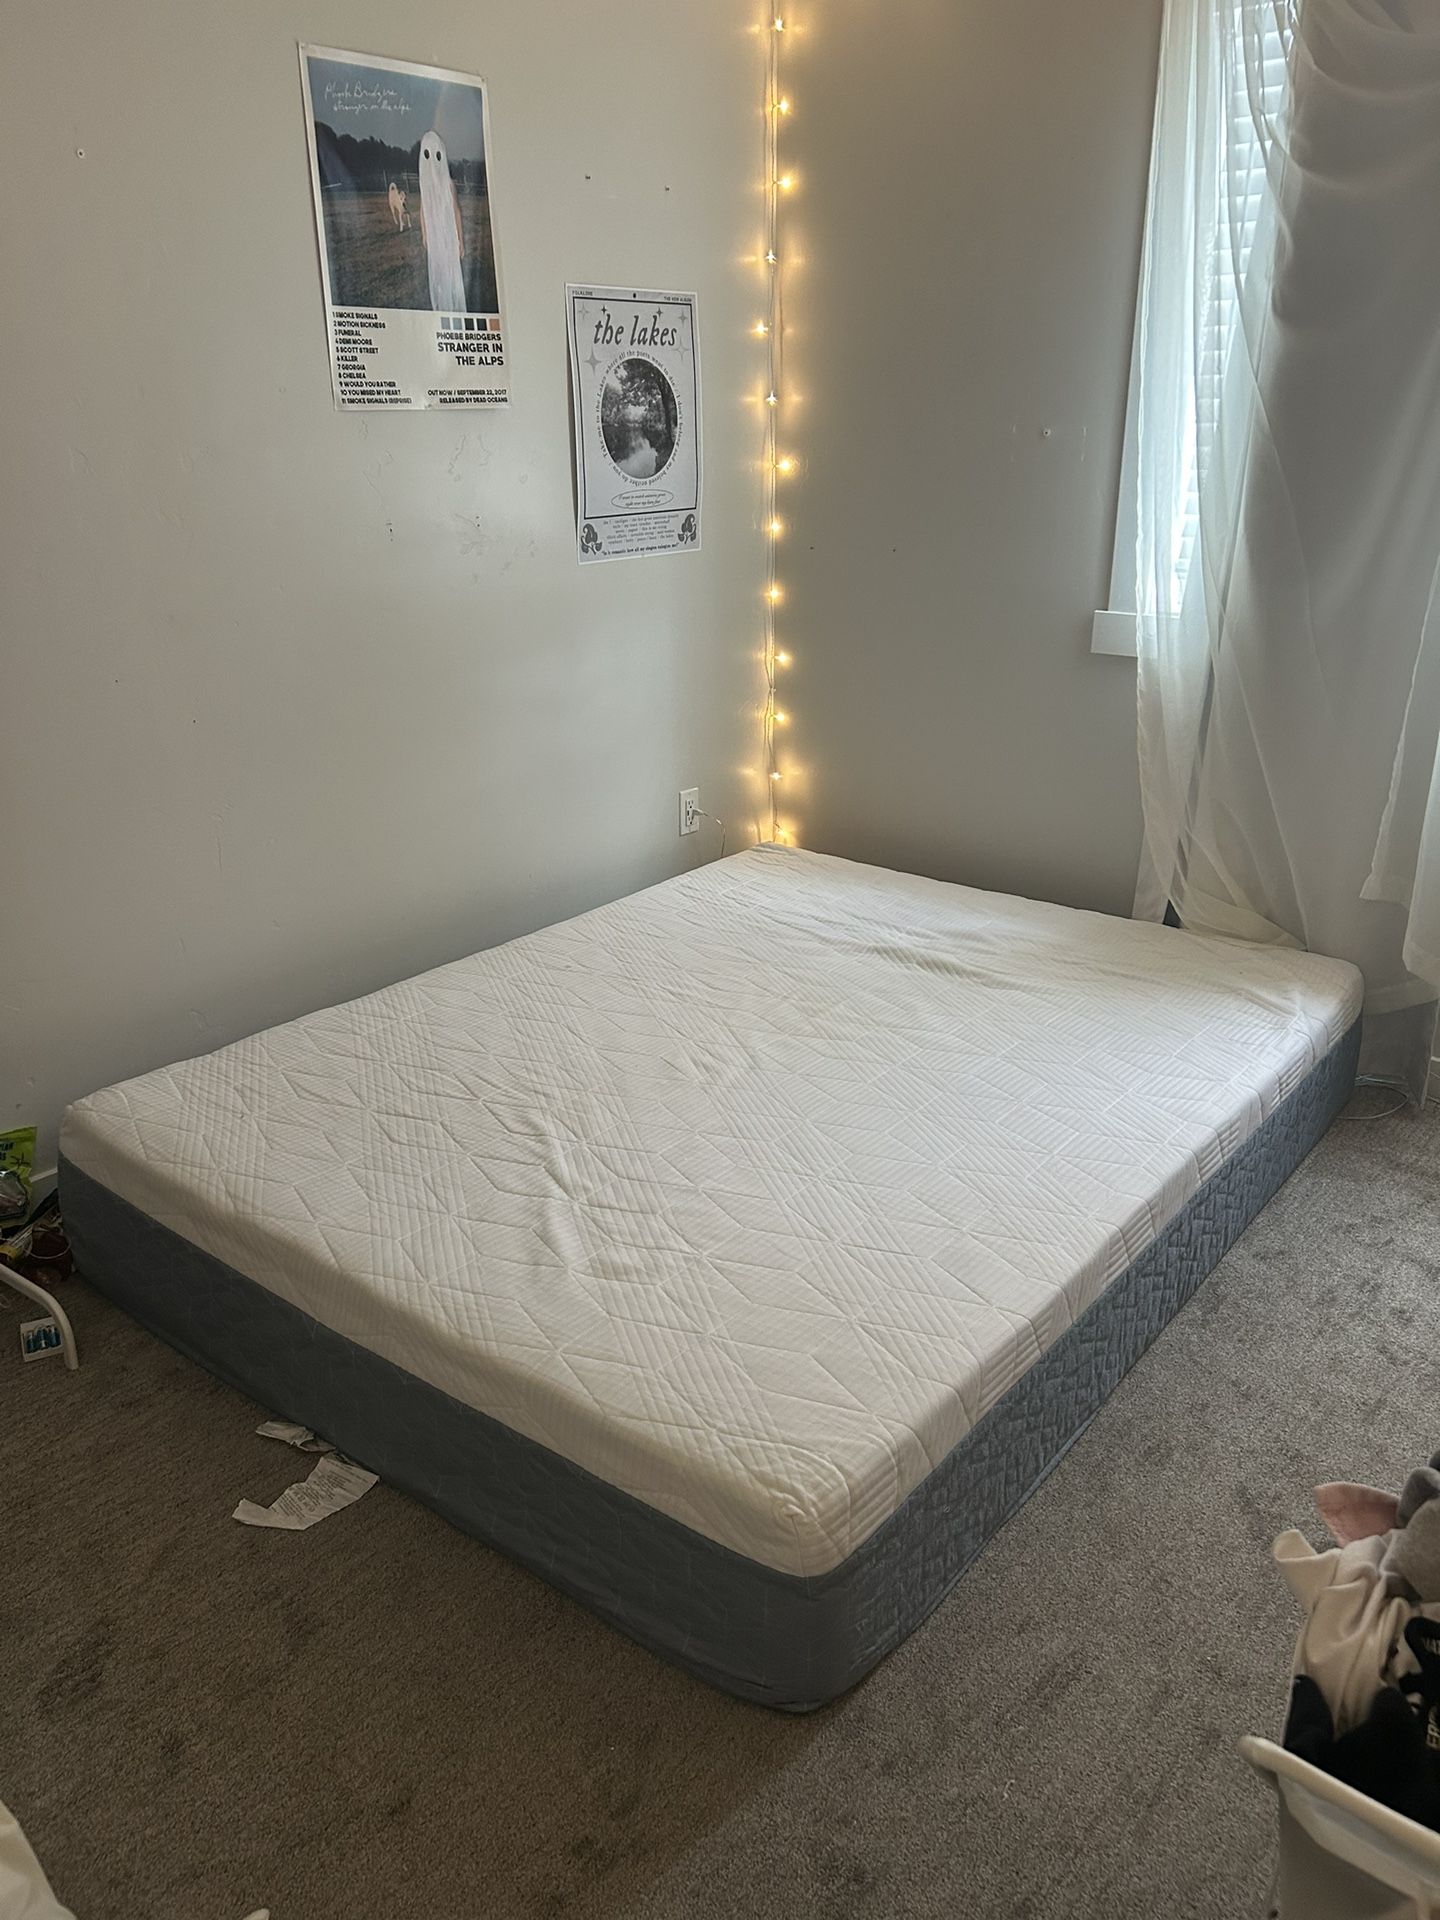 Amazon Basics Queen Mattress/ Lightly used for two years, like new